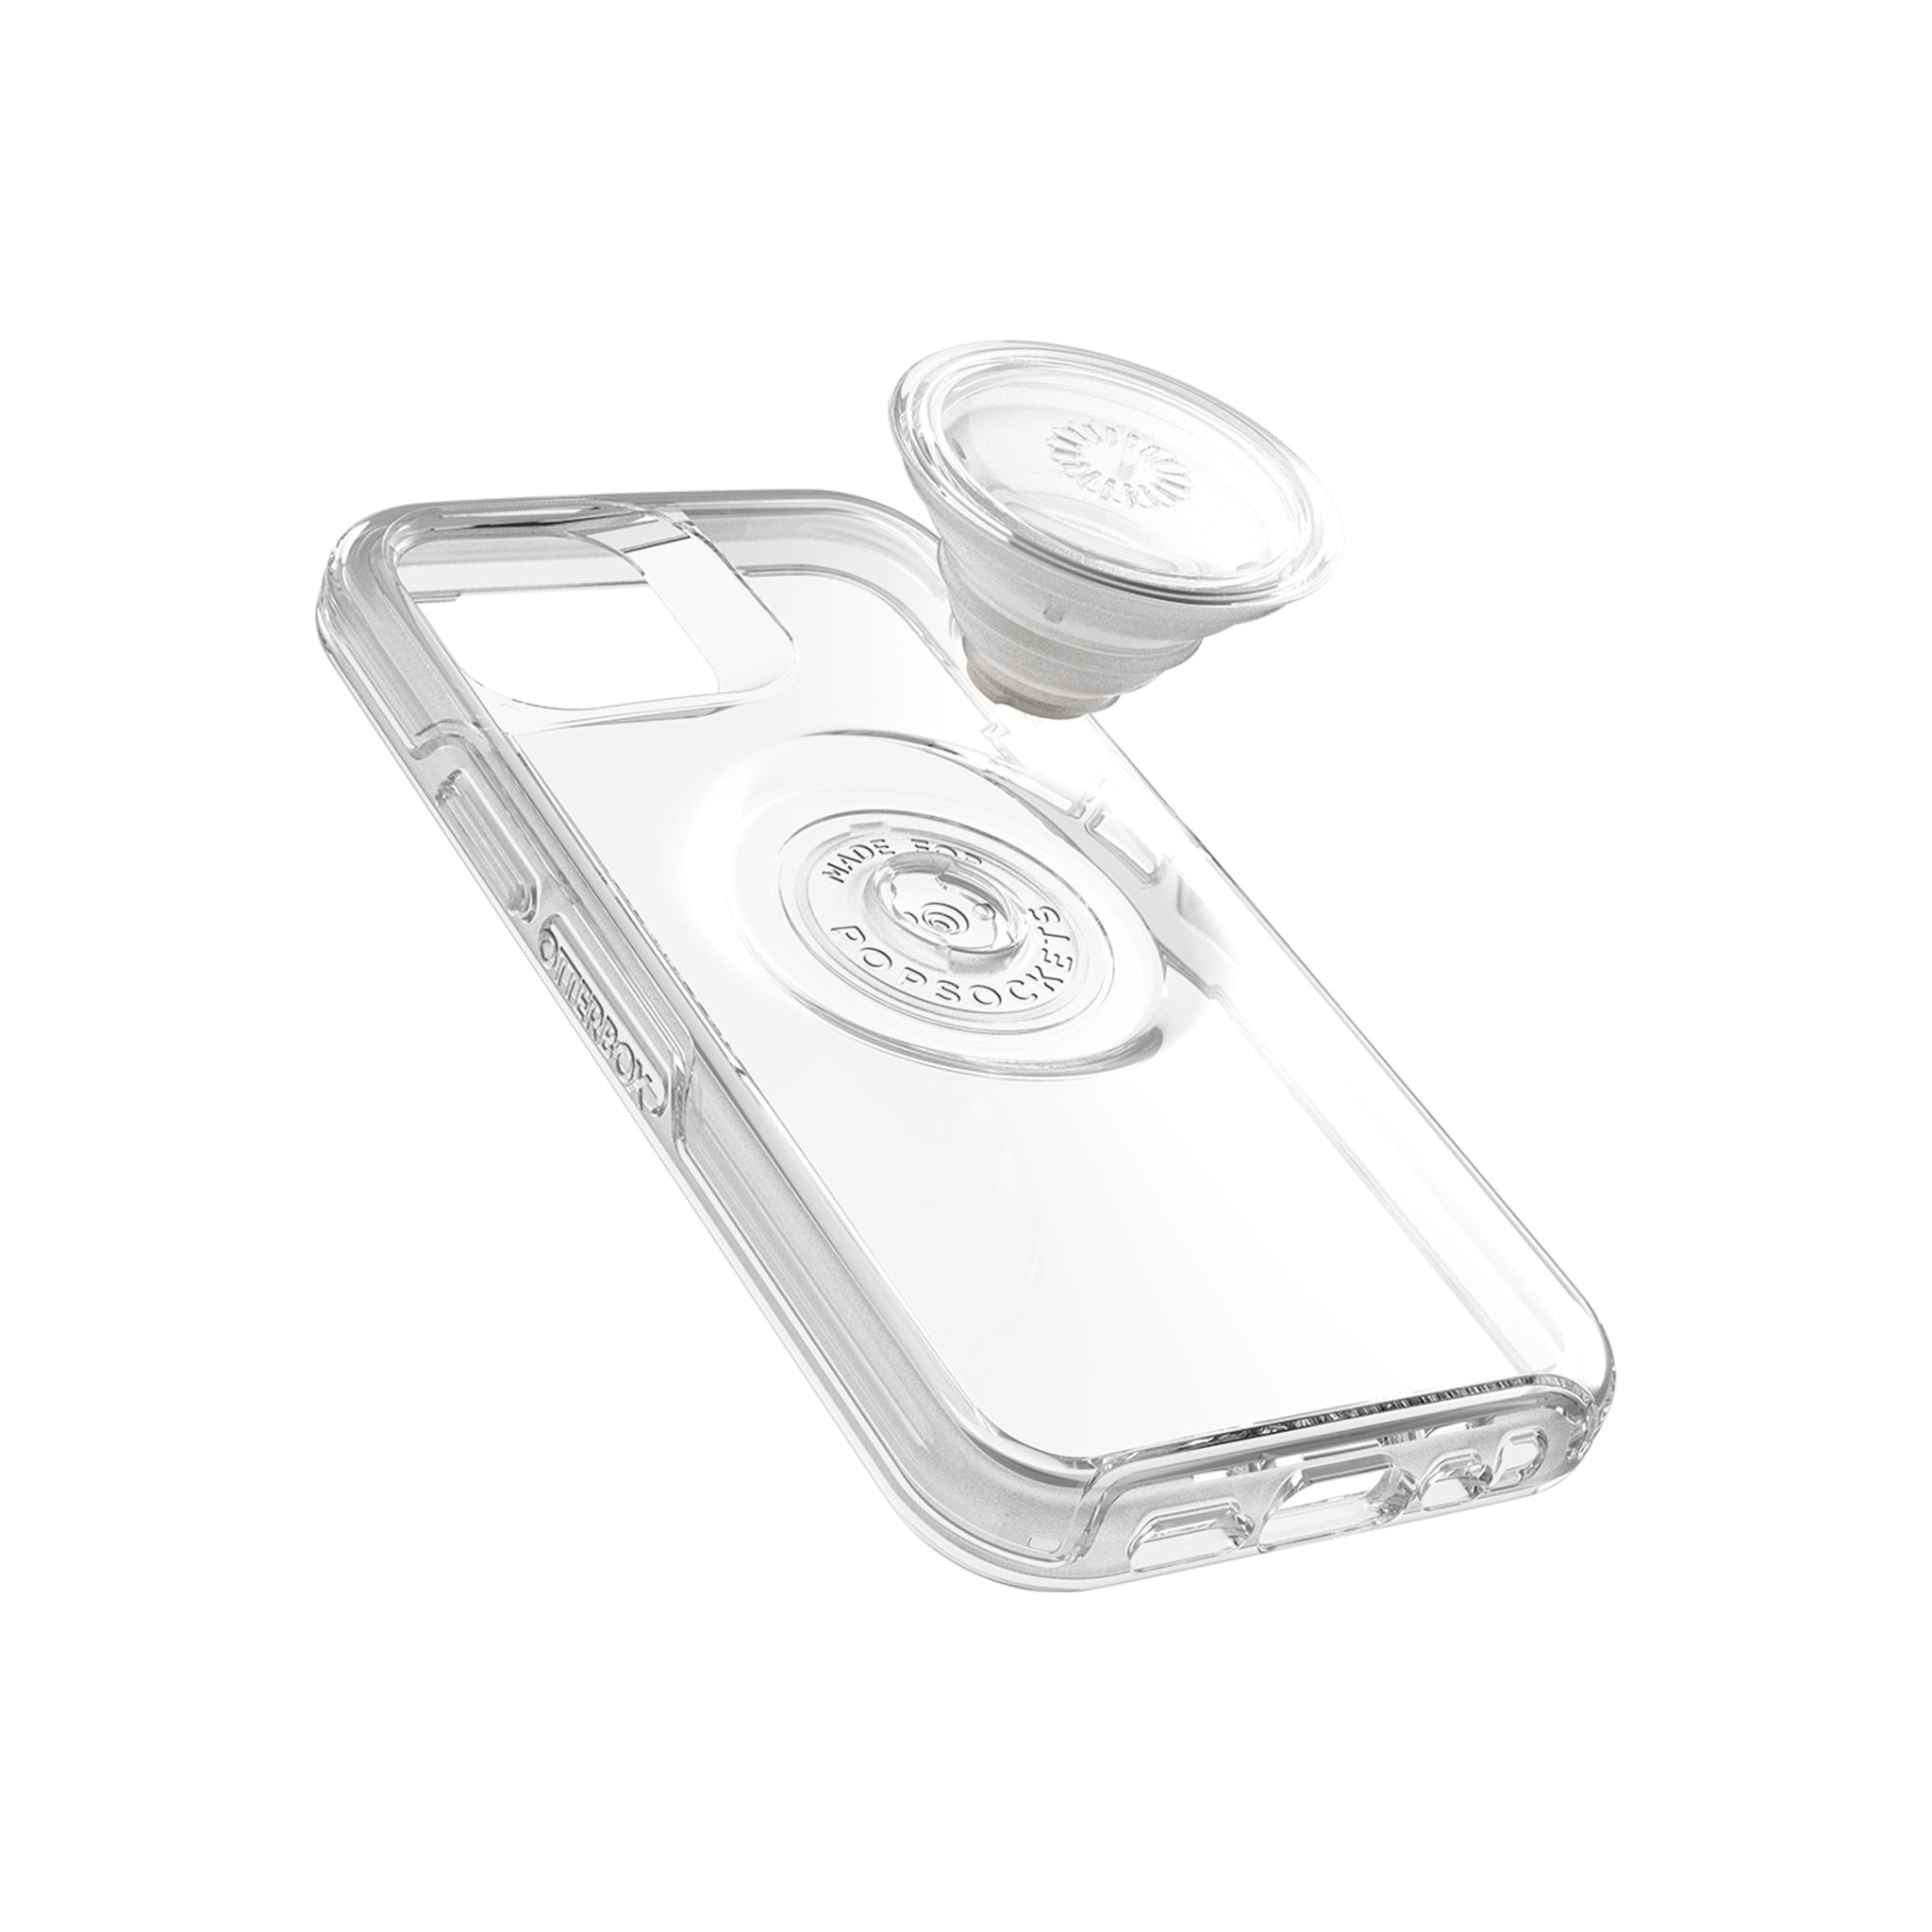 OtterBox - Otter + Pop Symmetry Clear for iPhone 12 mini - Clear Pop